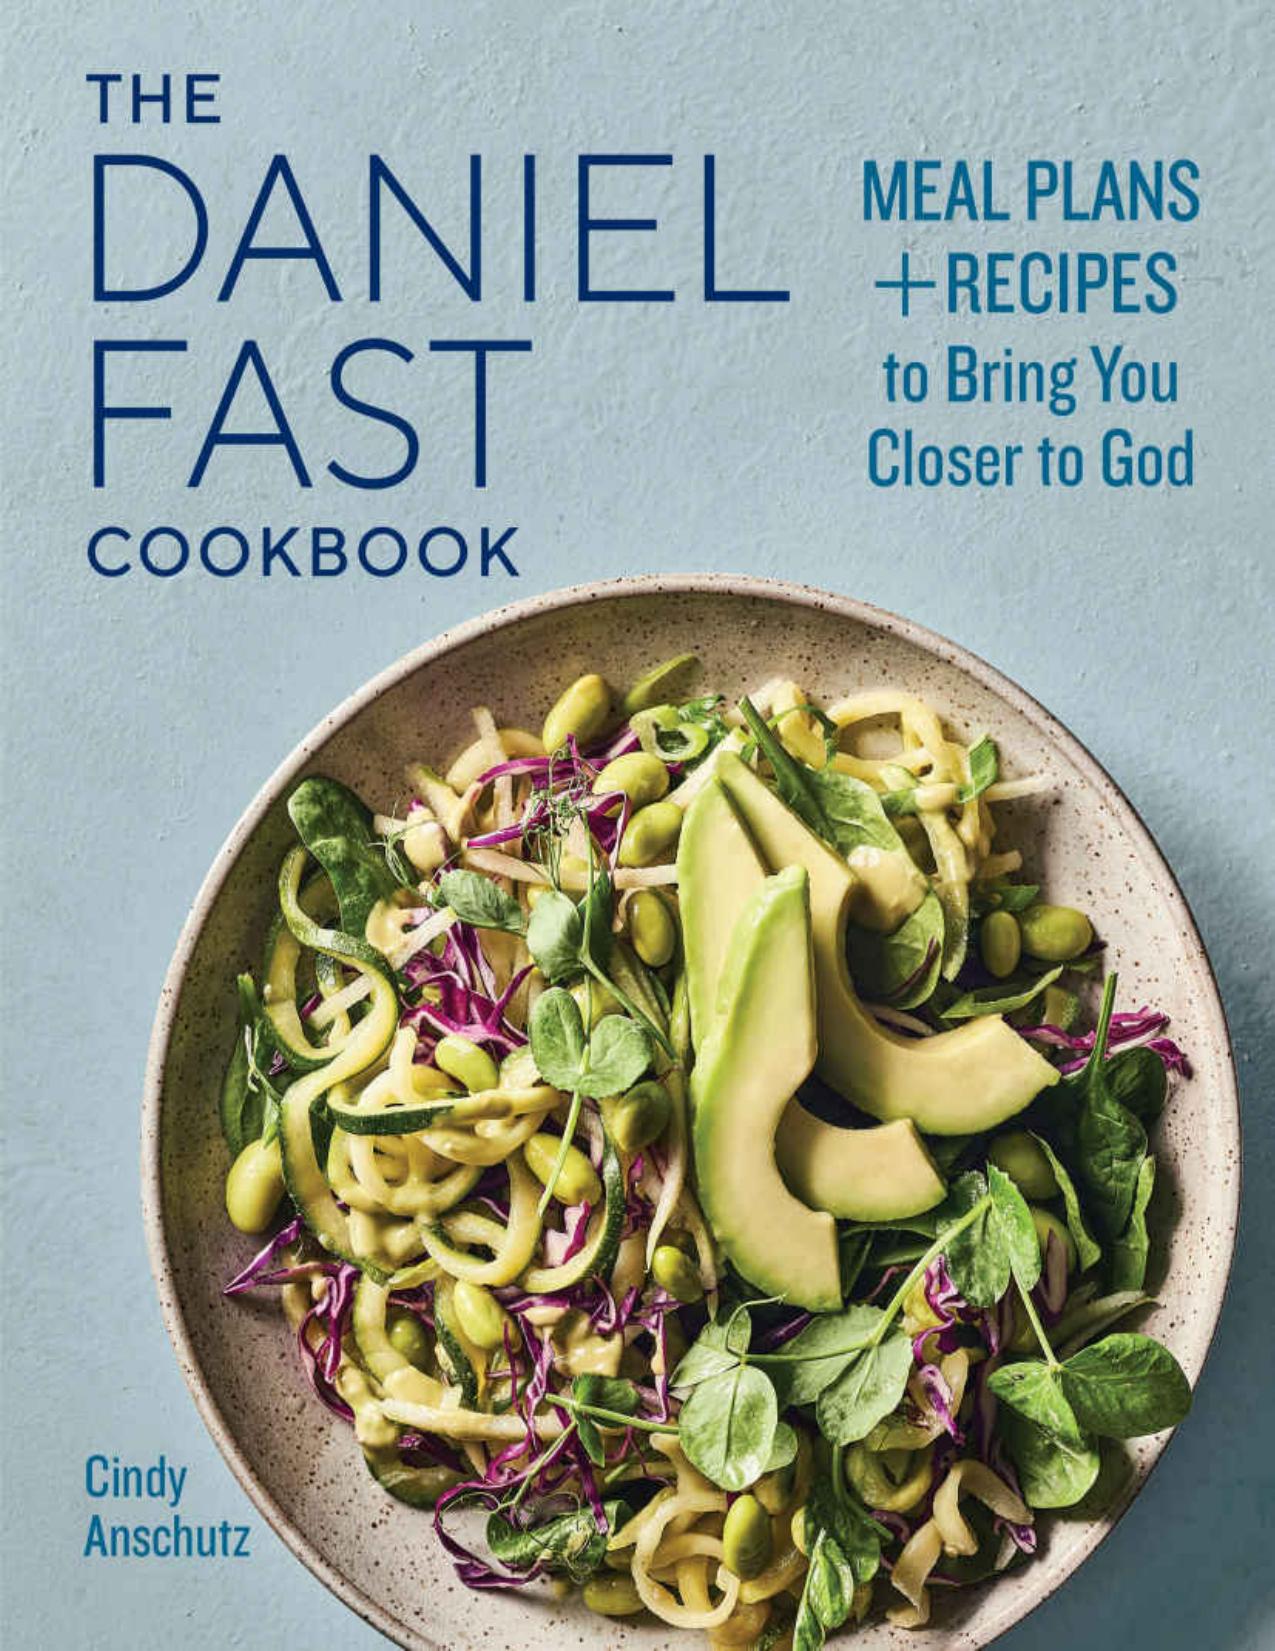 The Daniel Fast Cookbook: Meal Plans and Recipes to Bring You Closer to God by Cindy Anschutz